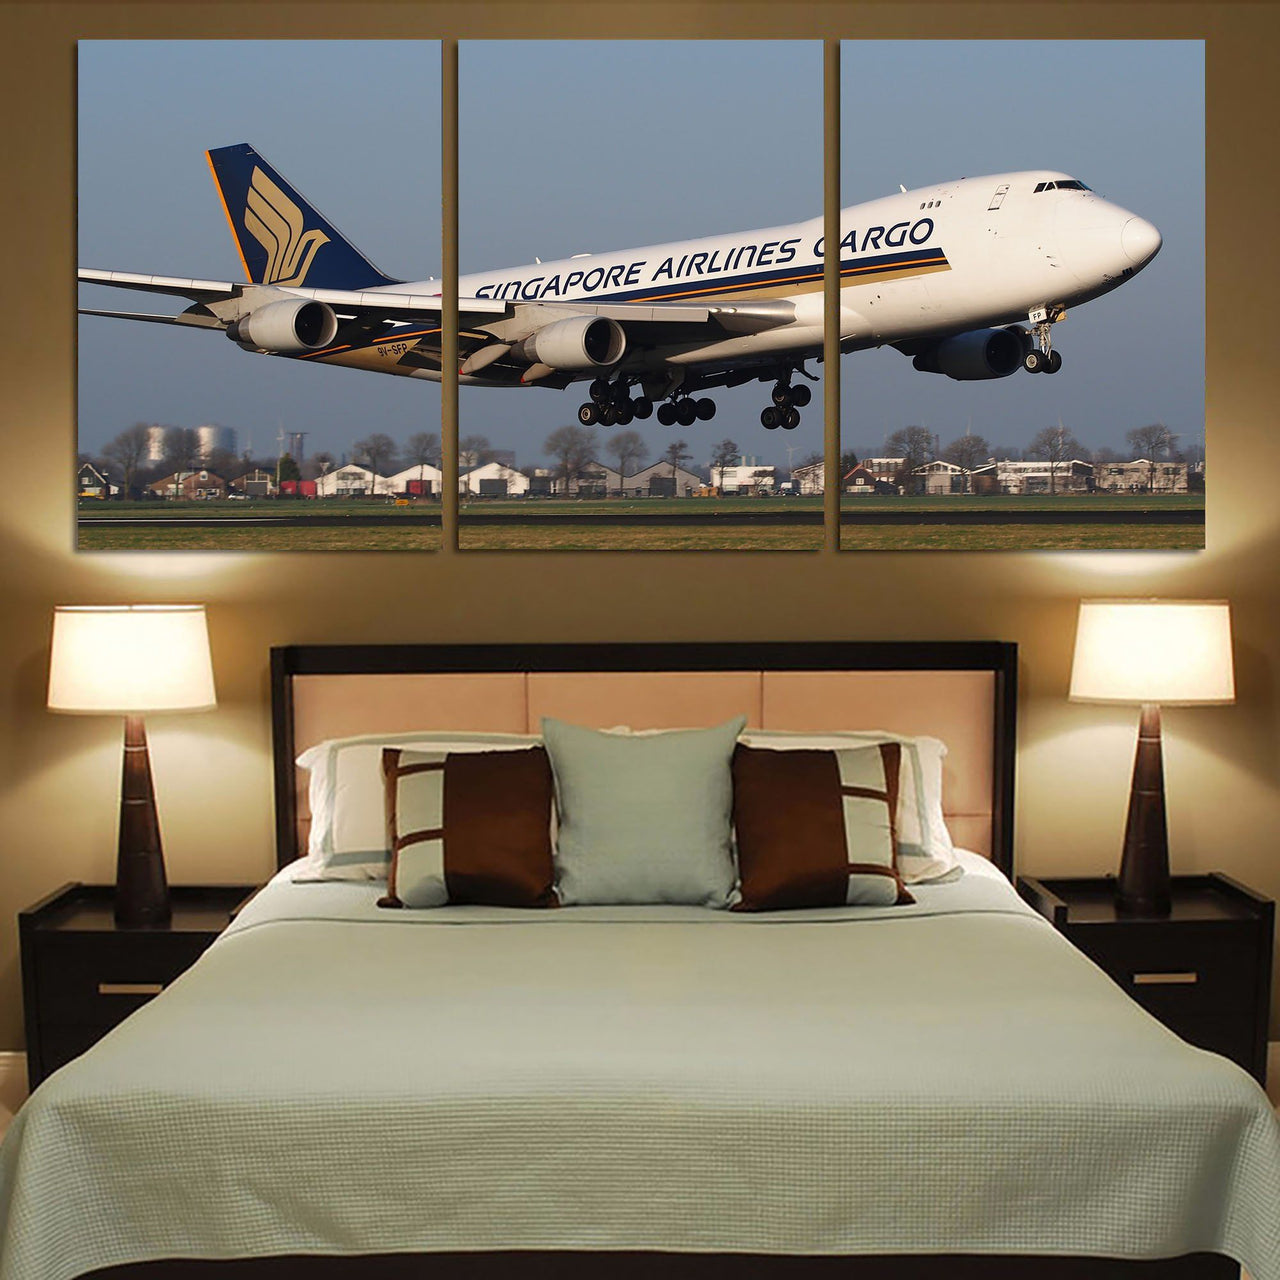 Singapore Airlines Cargo Boeing 747 Printed Canvas Posters (3 Pieces) Aviation Shop 